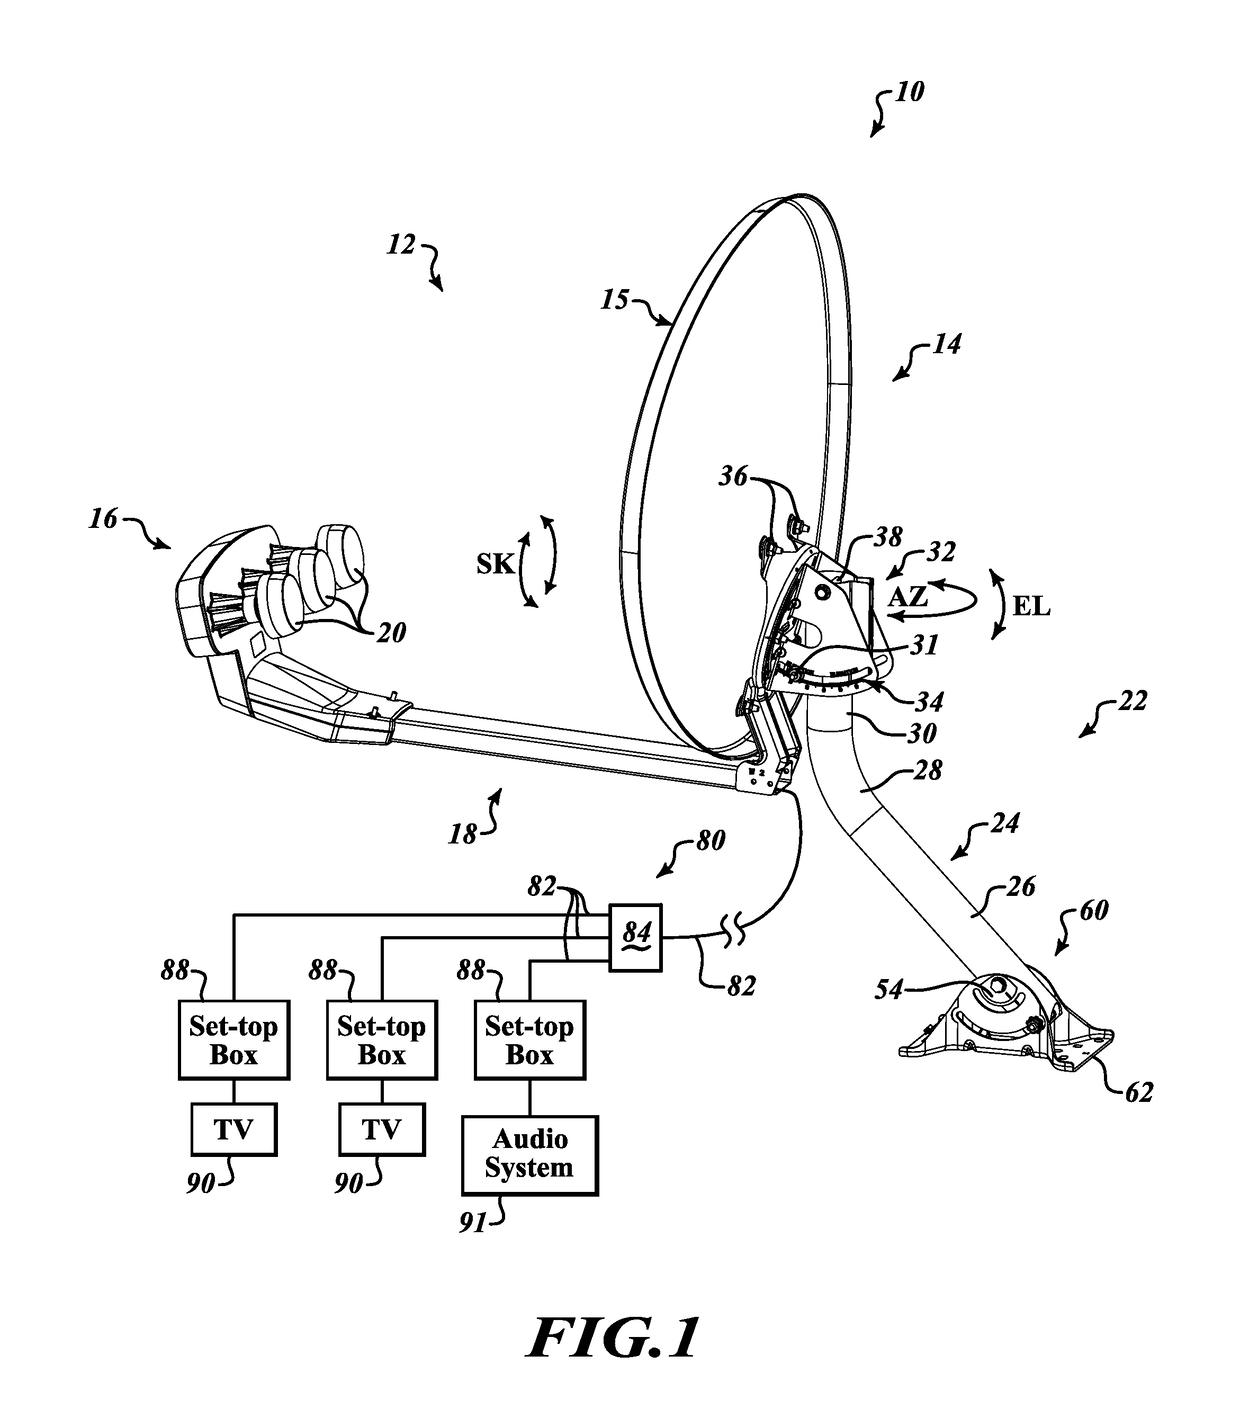 Systems, devices, and methods for orienting an antenna mast